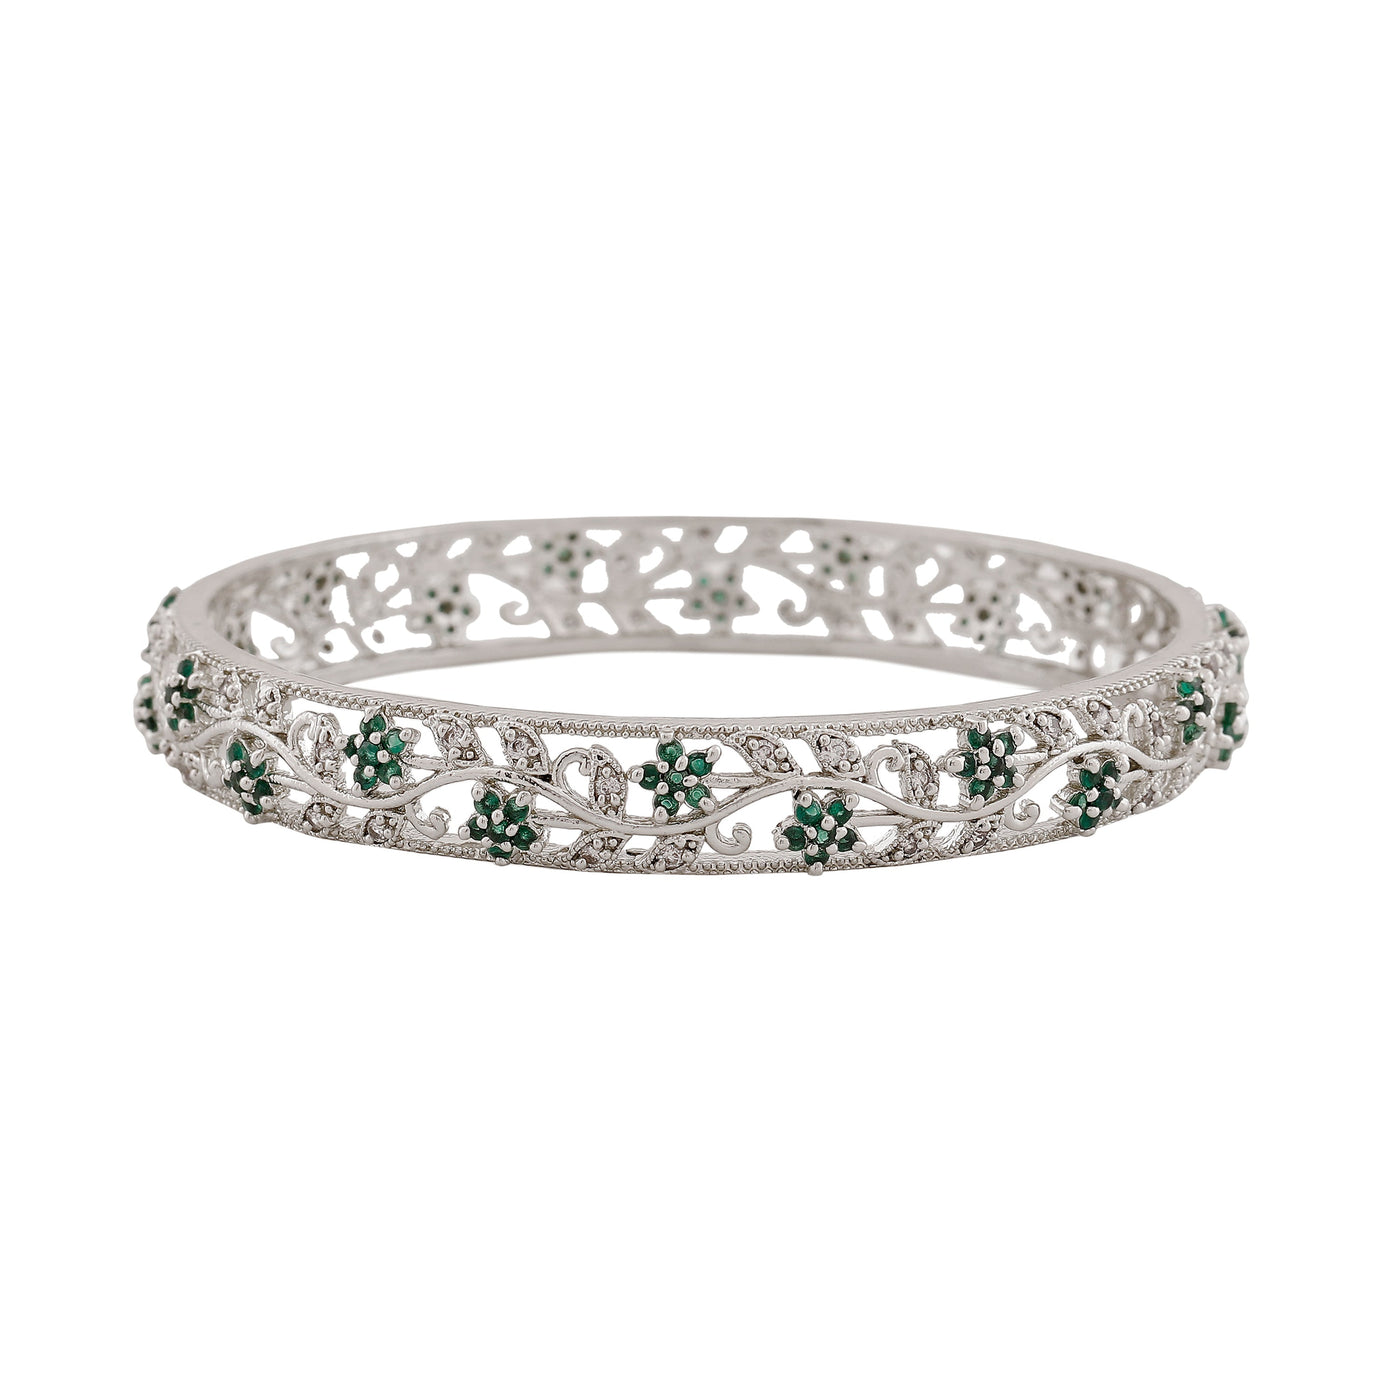 Estele Rhodium Plated CZ Flower Designer Bangles with Green Crystals for Women